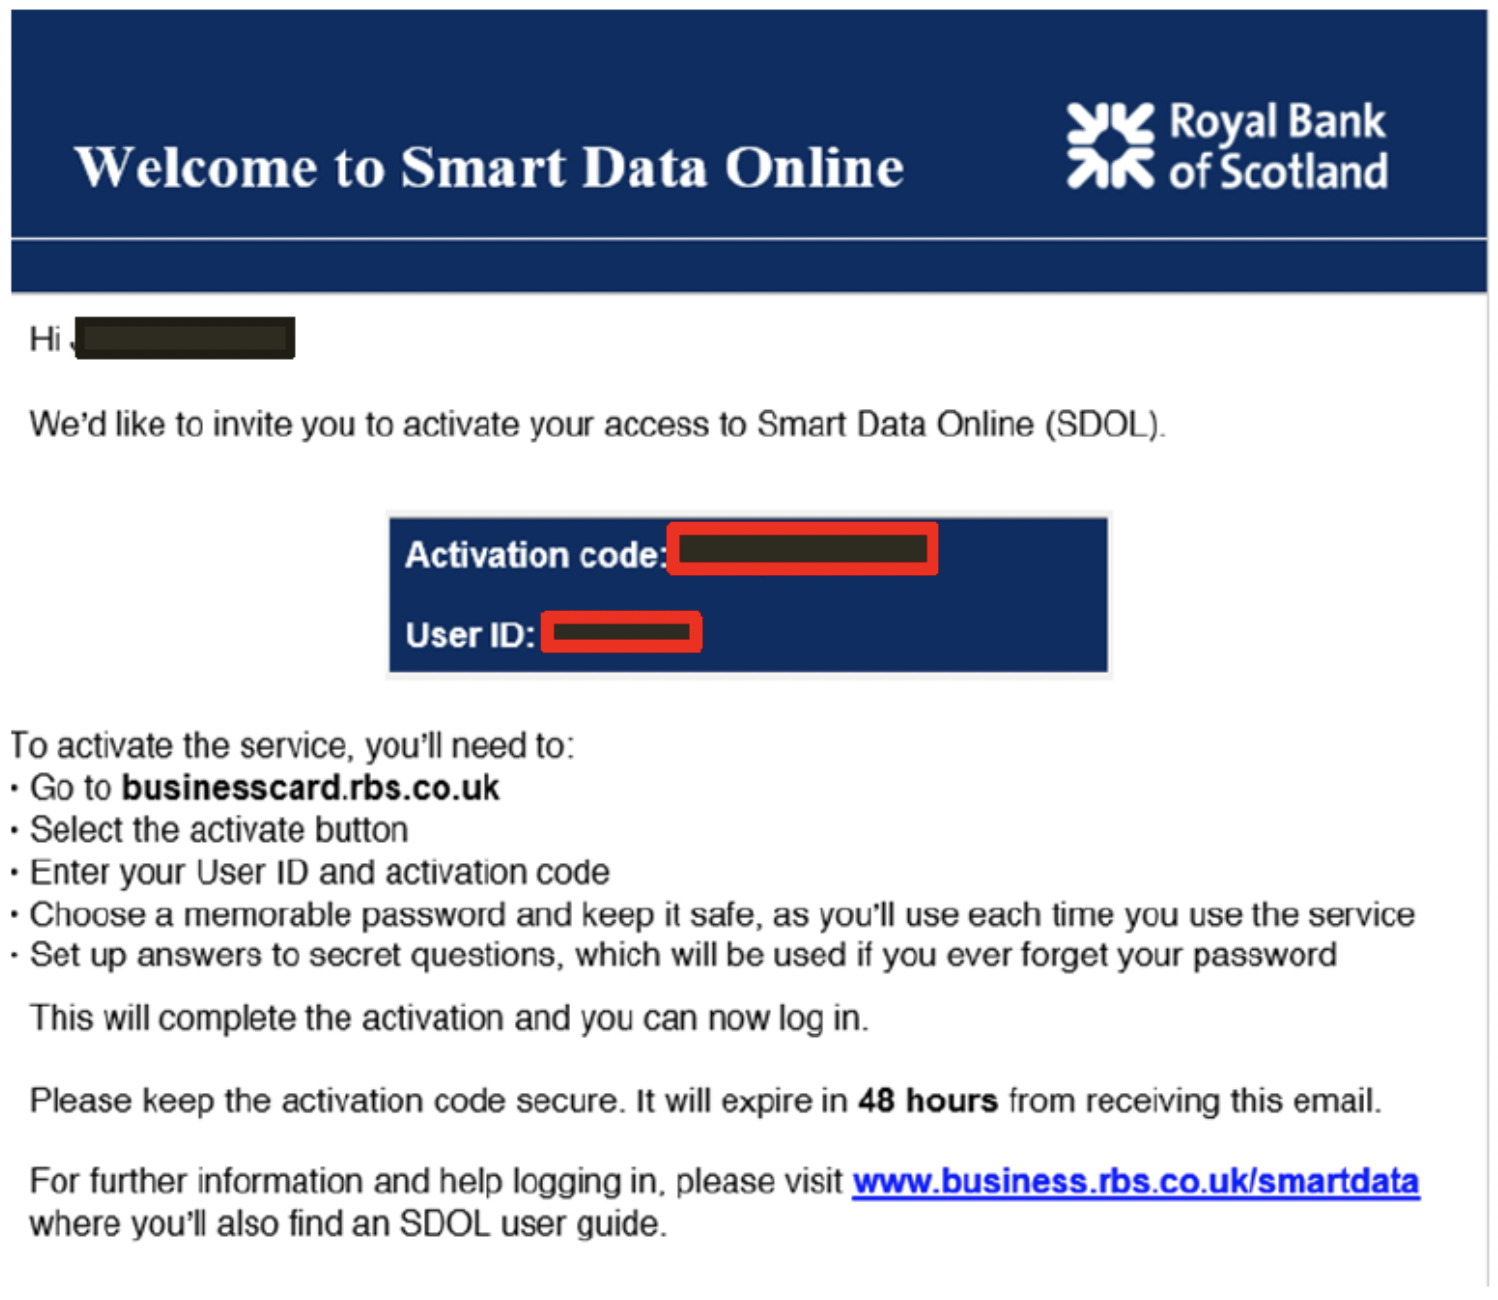 RBS Smart Data Online email activation code’